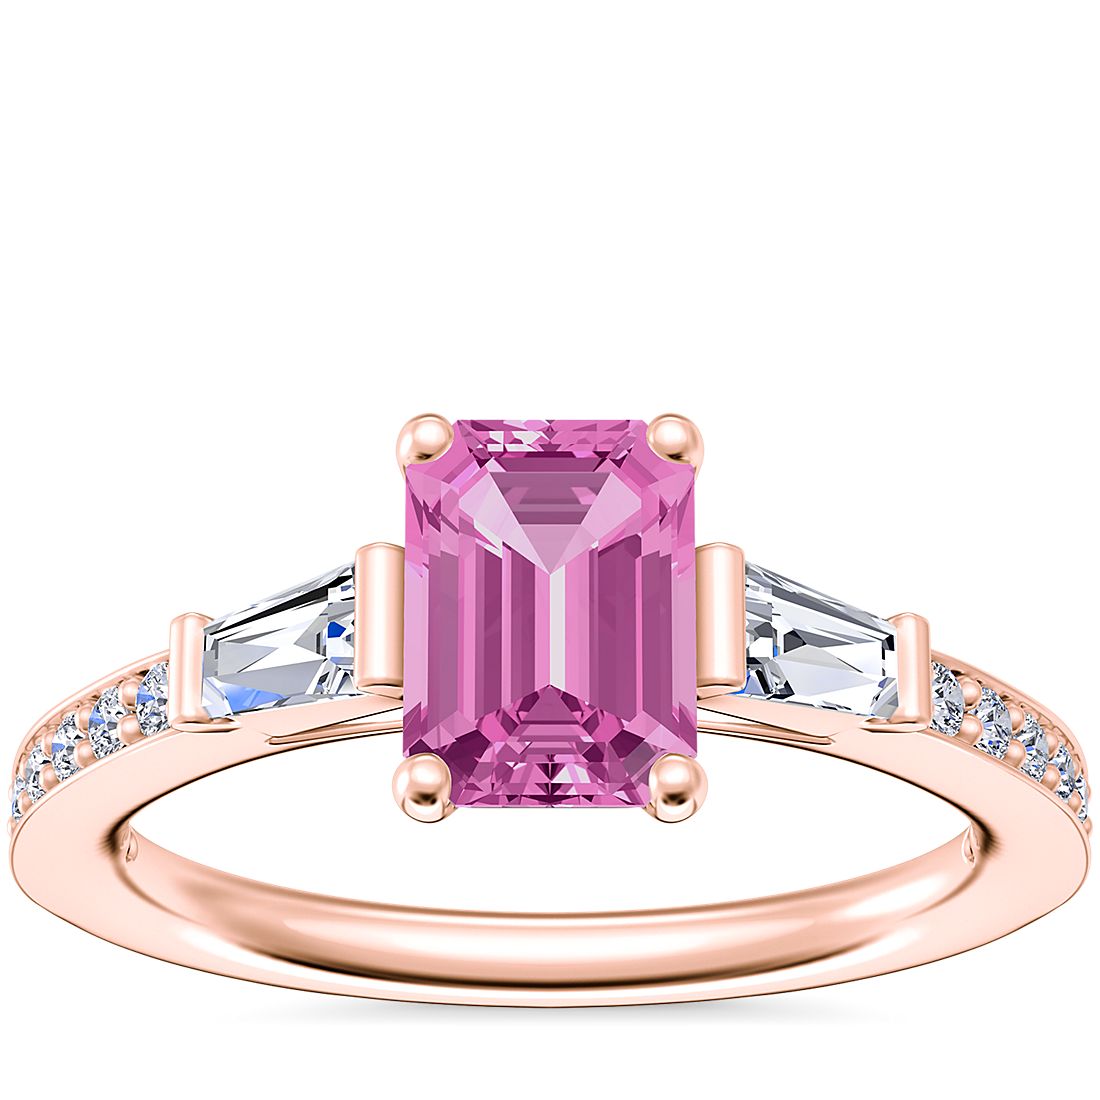 Tapered Baguette Diamond Cathedral Engagement Ring with Emerald-Cut Pink Sapphire in 14k Rose Gold (7x5mm)